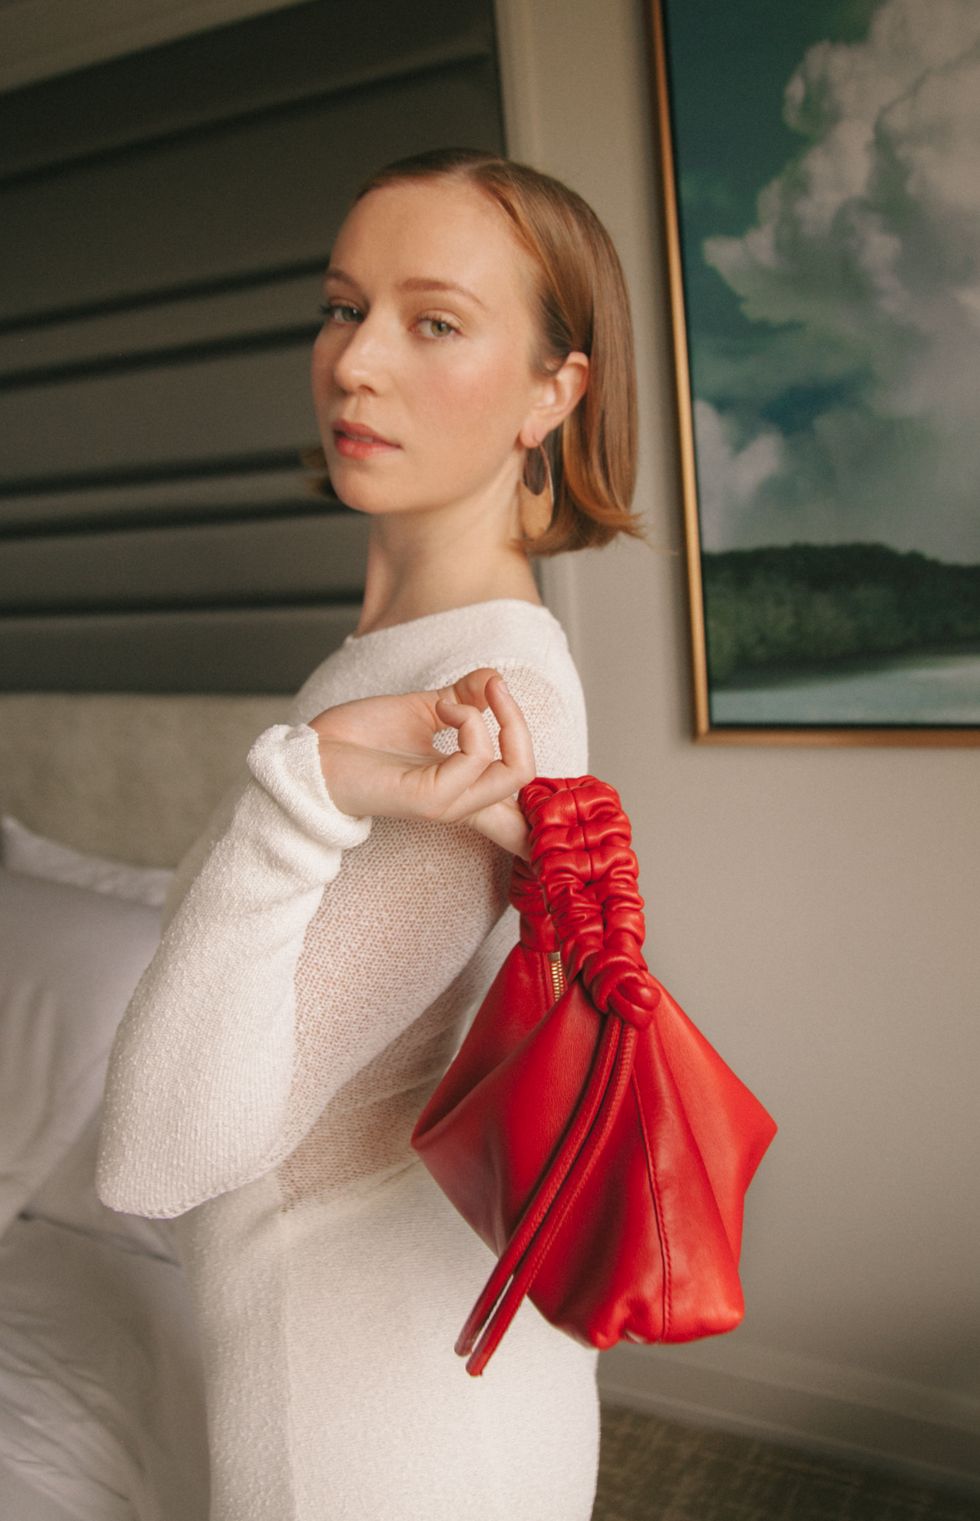 hannah einbinder posing in a white dress with a red purse thrown over her shoulder